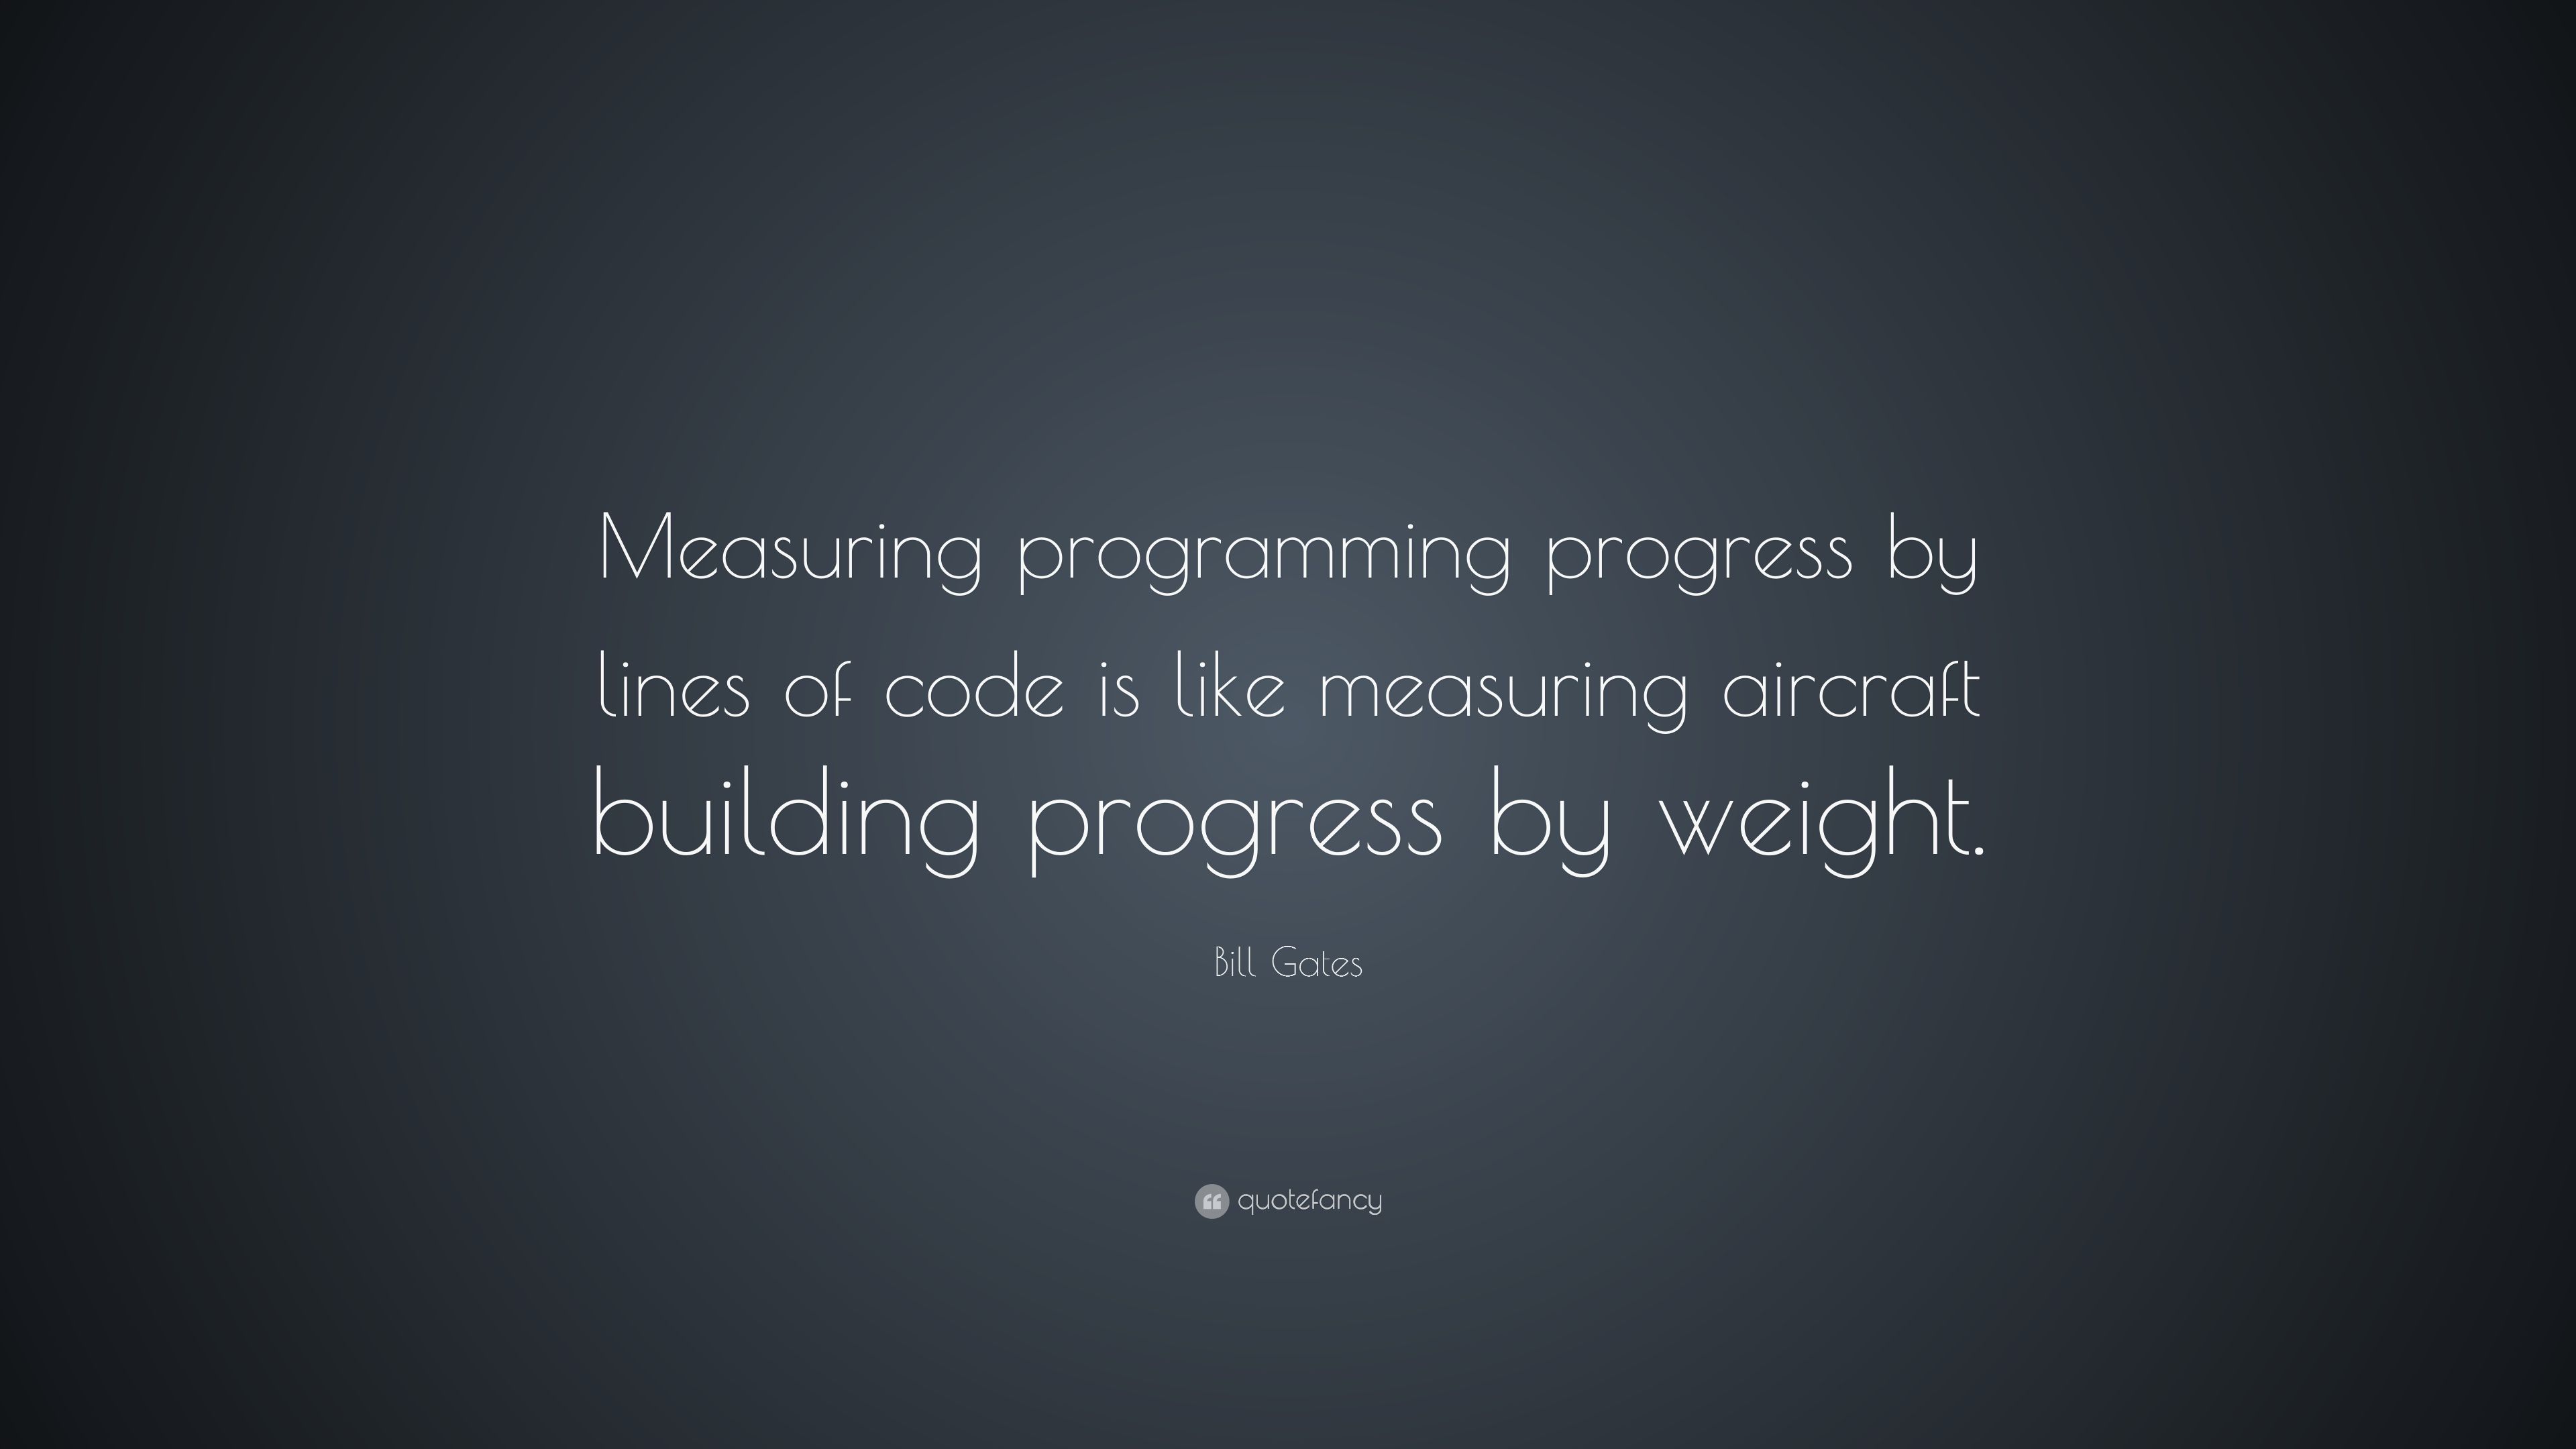 Bill Gates Quote: “Measuring programming progress by lines of code is like measuring aircraft building progress